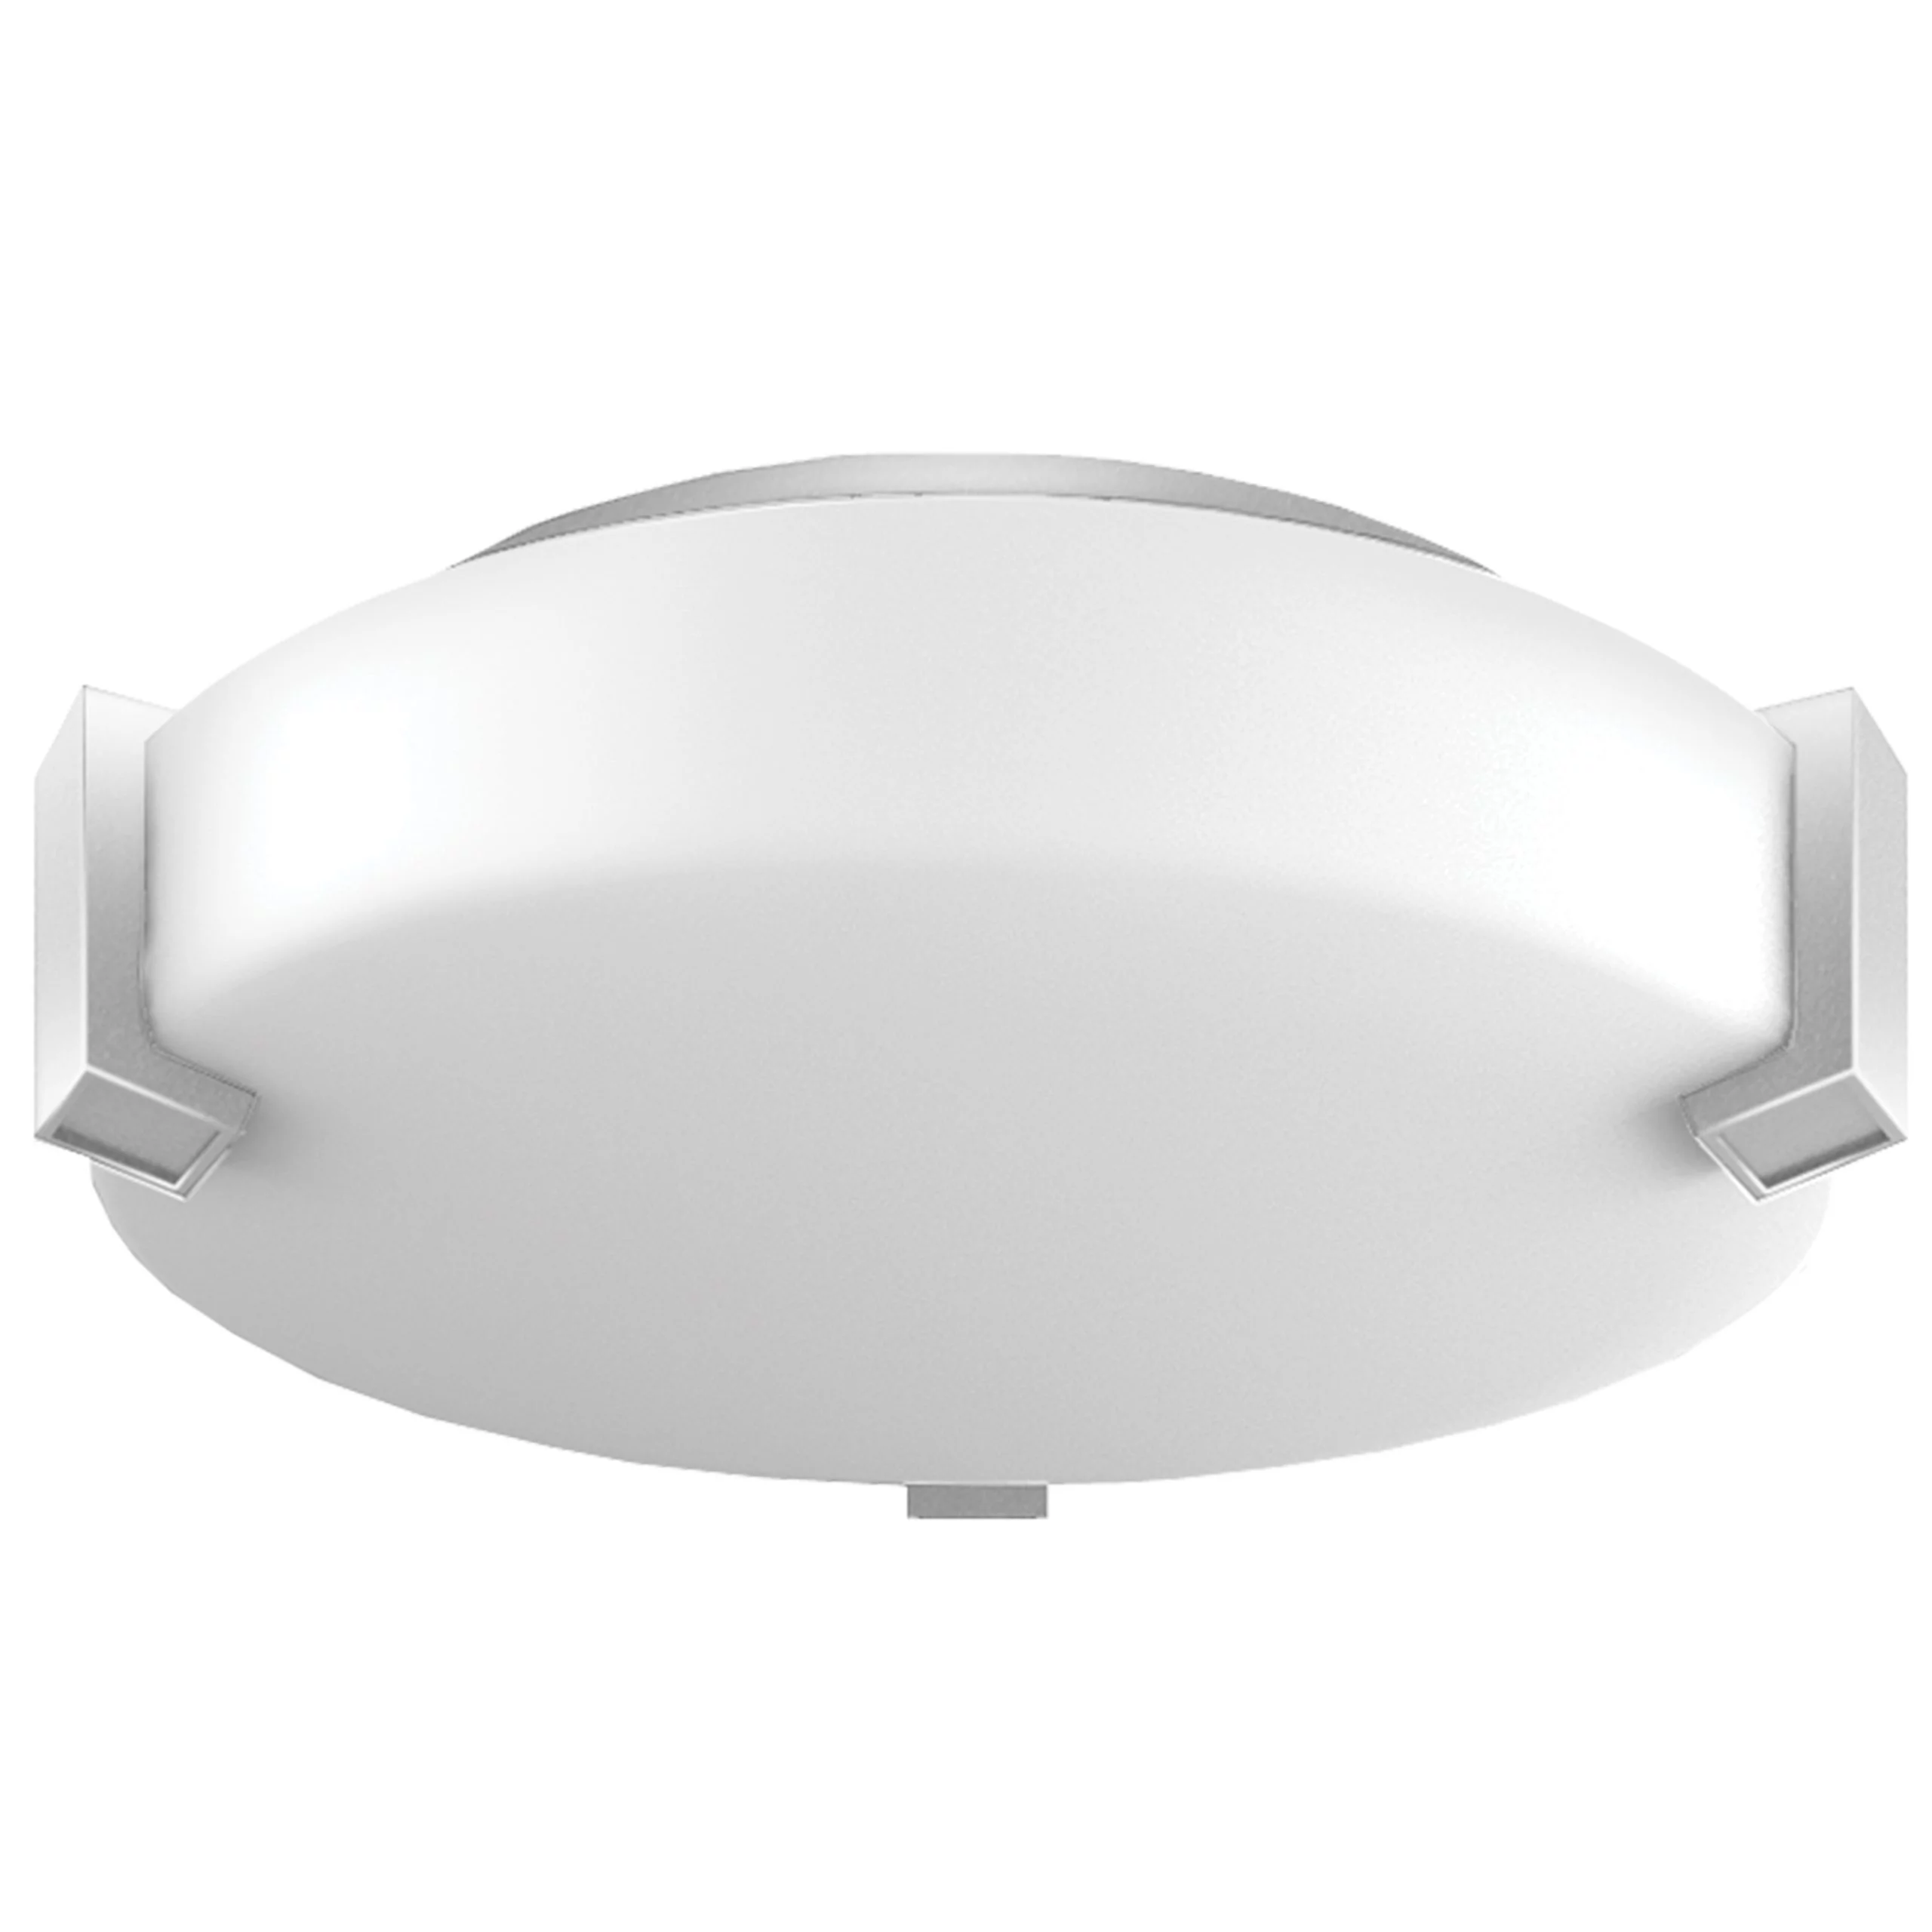 12"W Satin Nickel Ceiling Light with Frosted Acrylic Shade